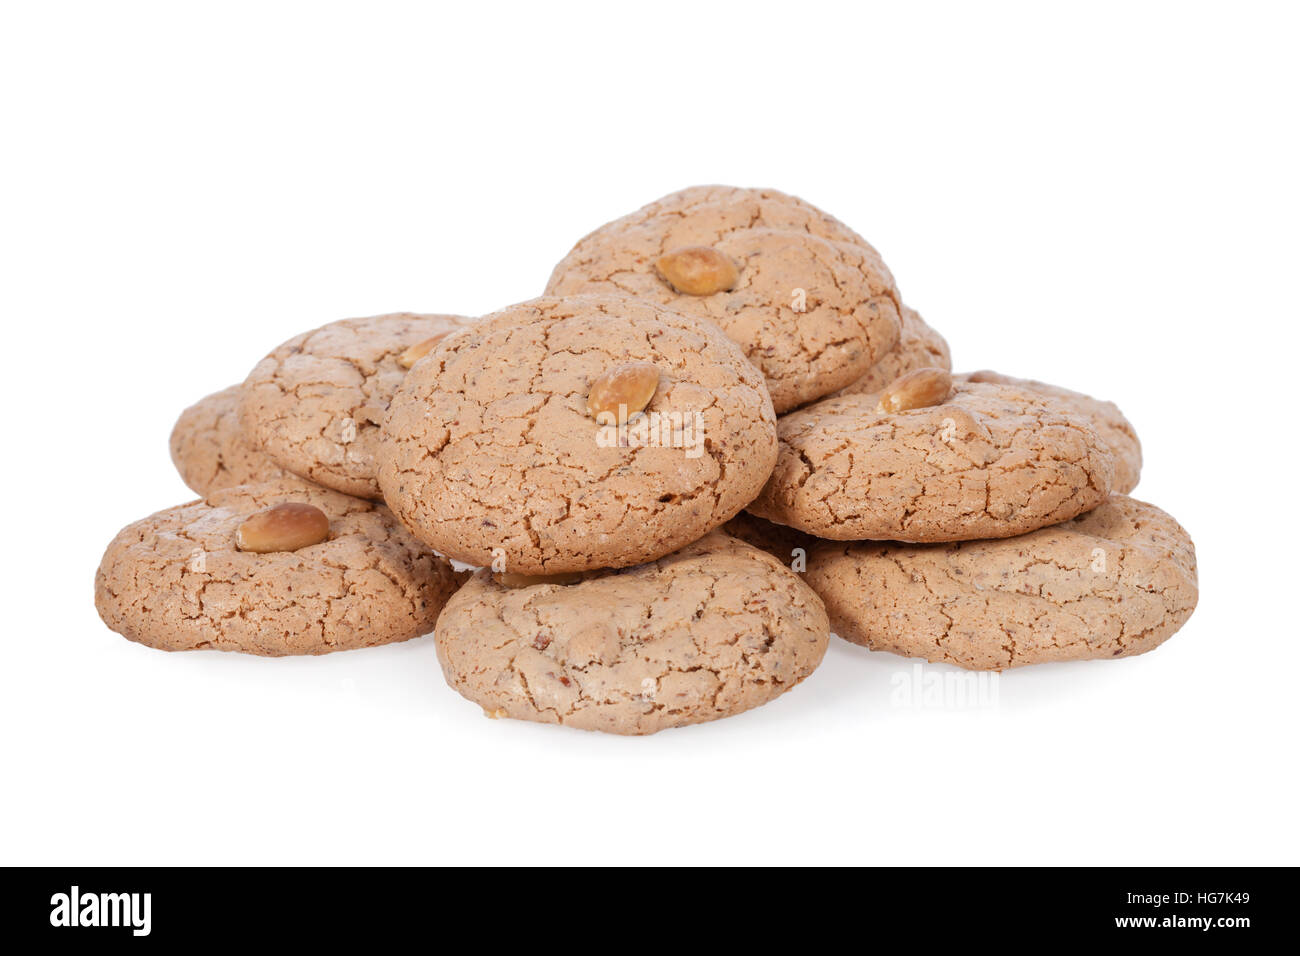 Almendrados, a typical and traditional almond biscuit from the Algarve region of Portugal, isolated on white background Stock Photo